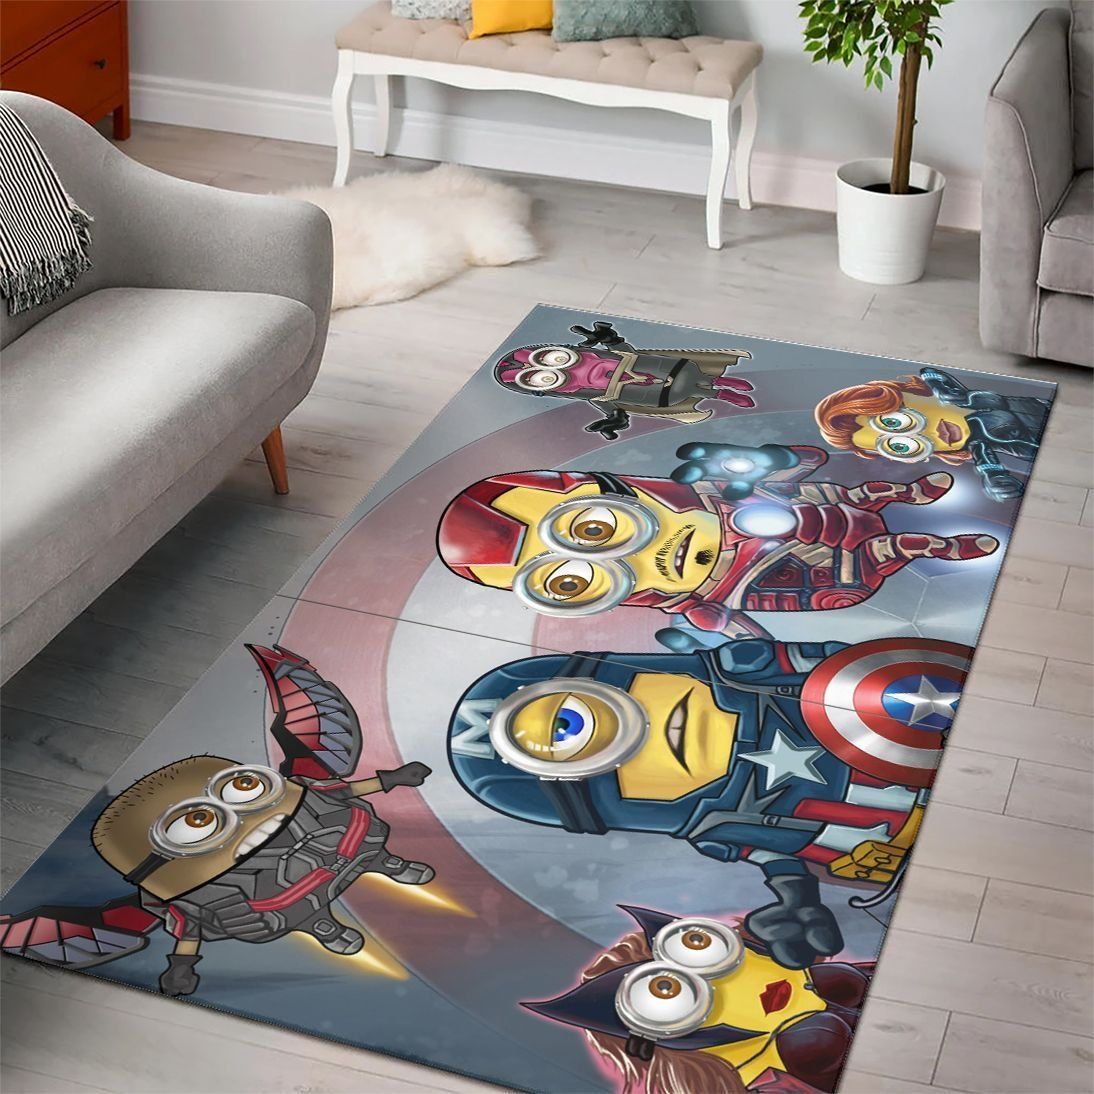 AVENGER MINIONS DESPICABLE MINIONS CARTOON MOVIES AREA RUGS LIVING ROOM CARPET FLOOR DECOR THE US DECOR – CUSTOM SIZE AND PRINTING